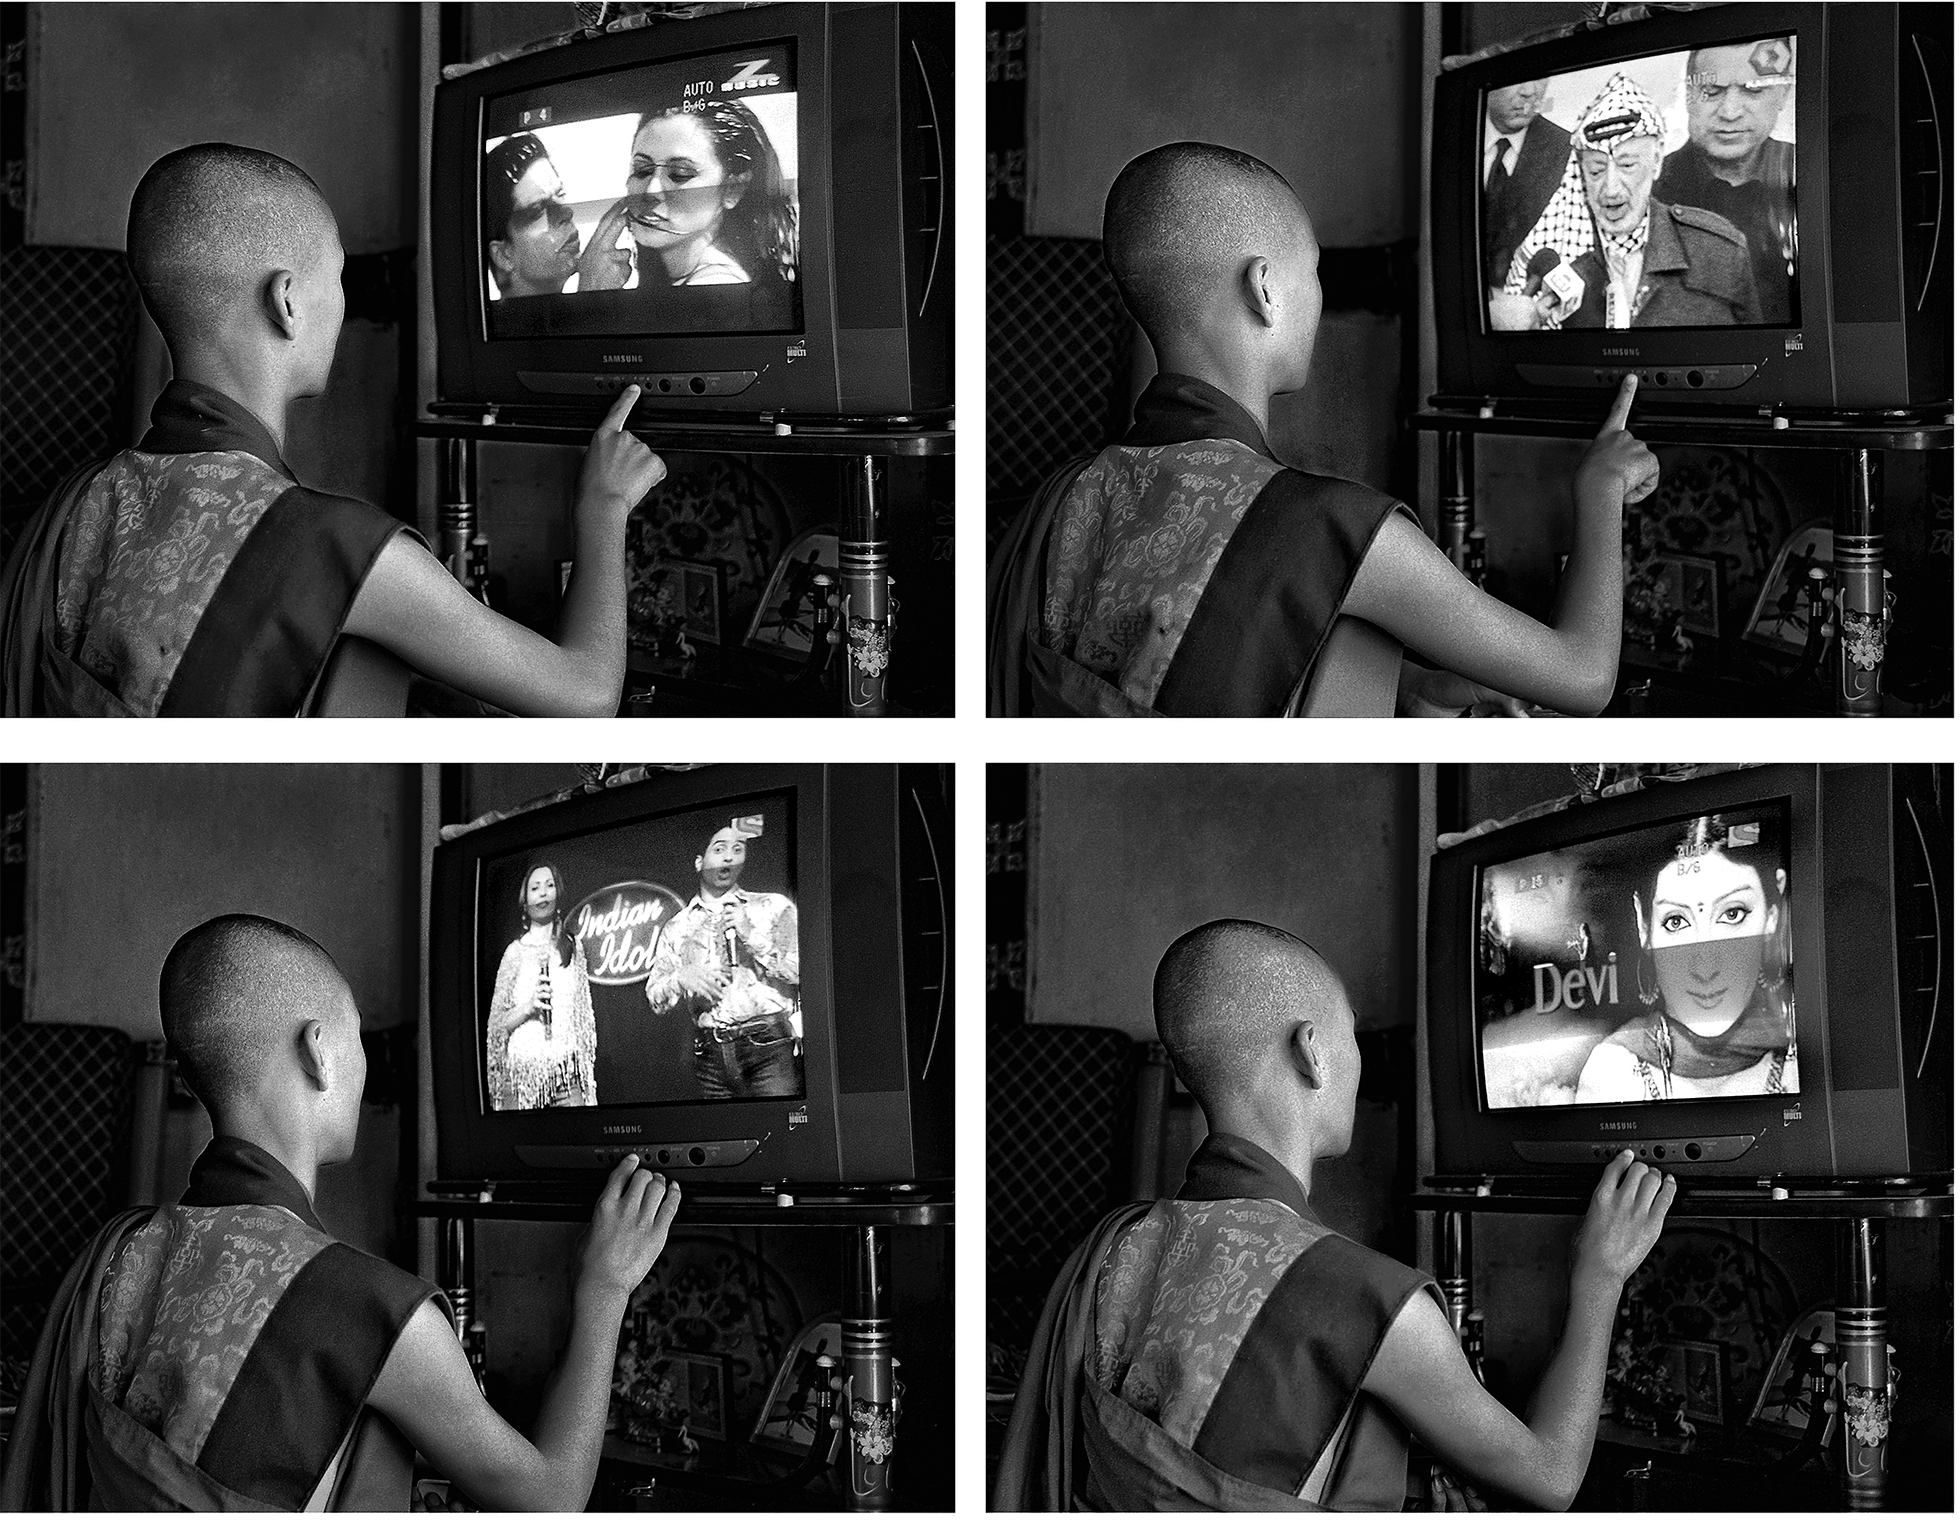 A series of images of a young Bhutanese monk as he flips through channels manually on an older Samsung television.